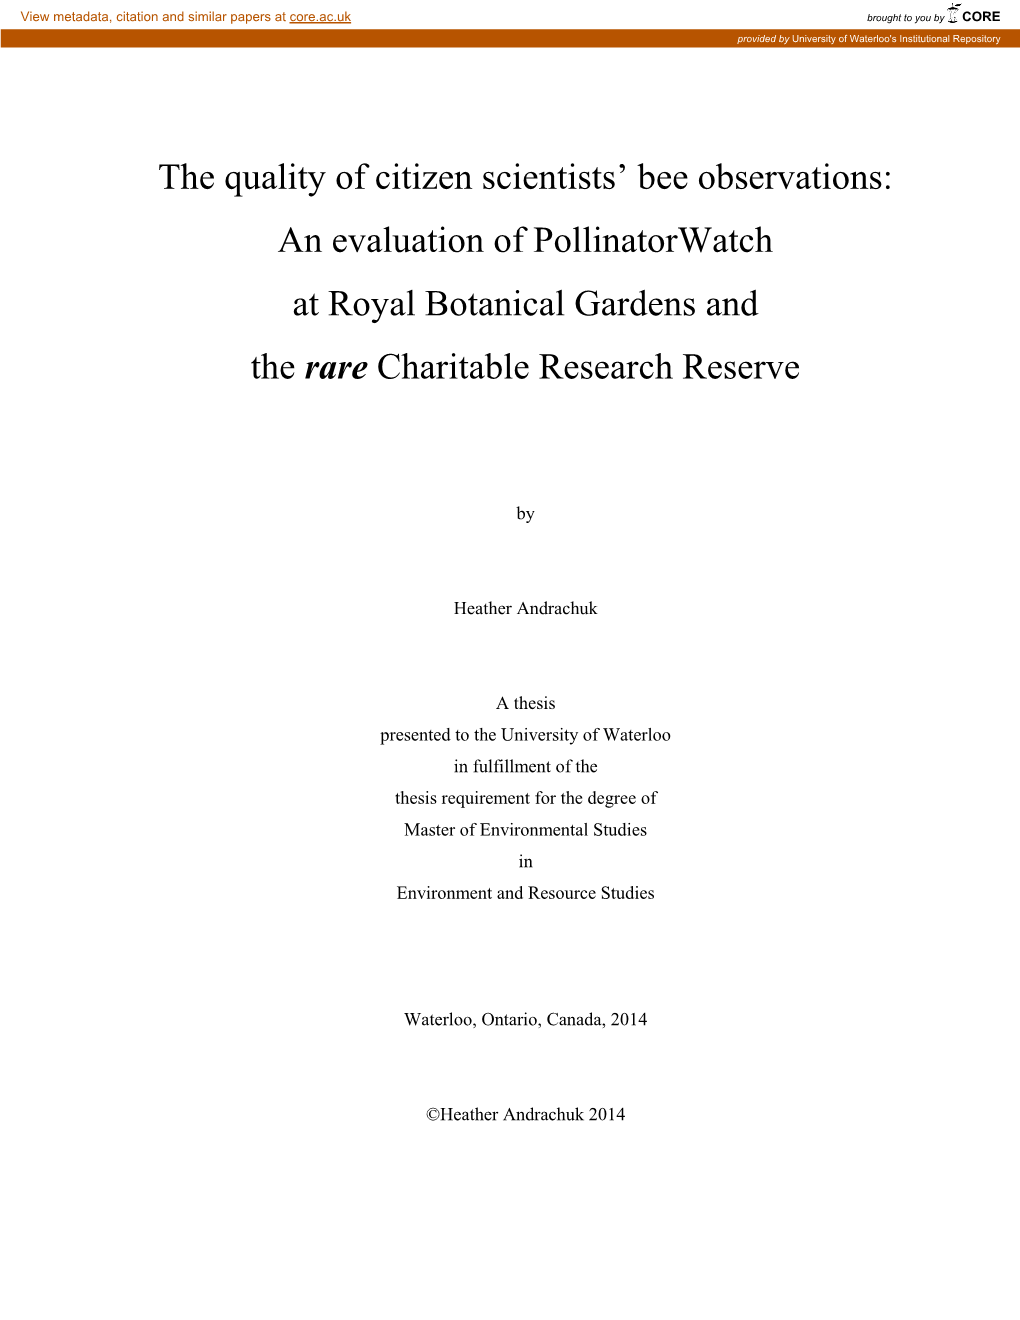 The Quality of Citizen Scientists' Bee Observations: an Evaluation of Pollinatorwatch at Royal Botanical Gardens and the Rare